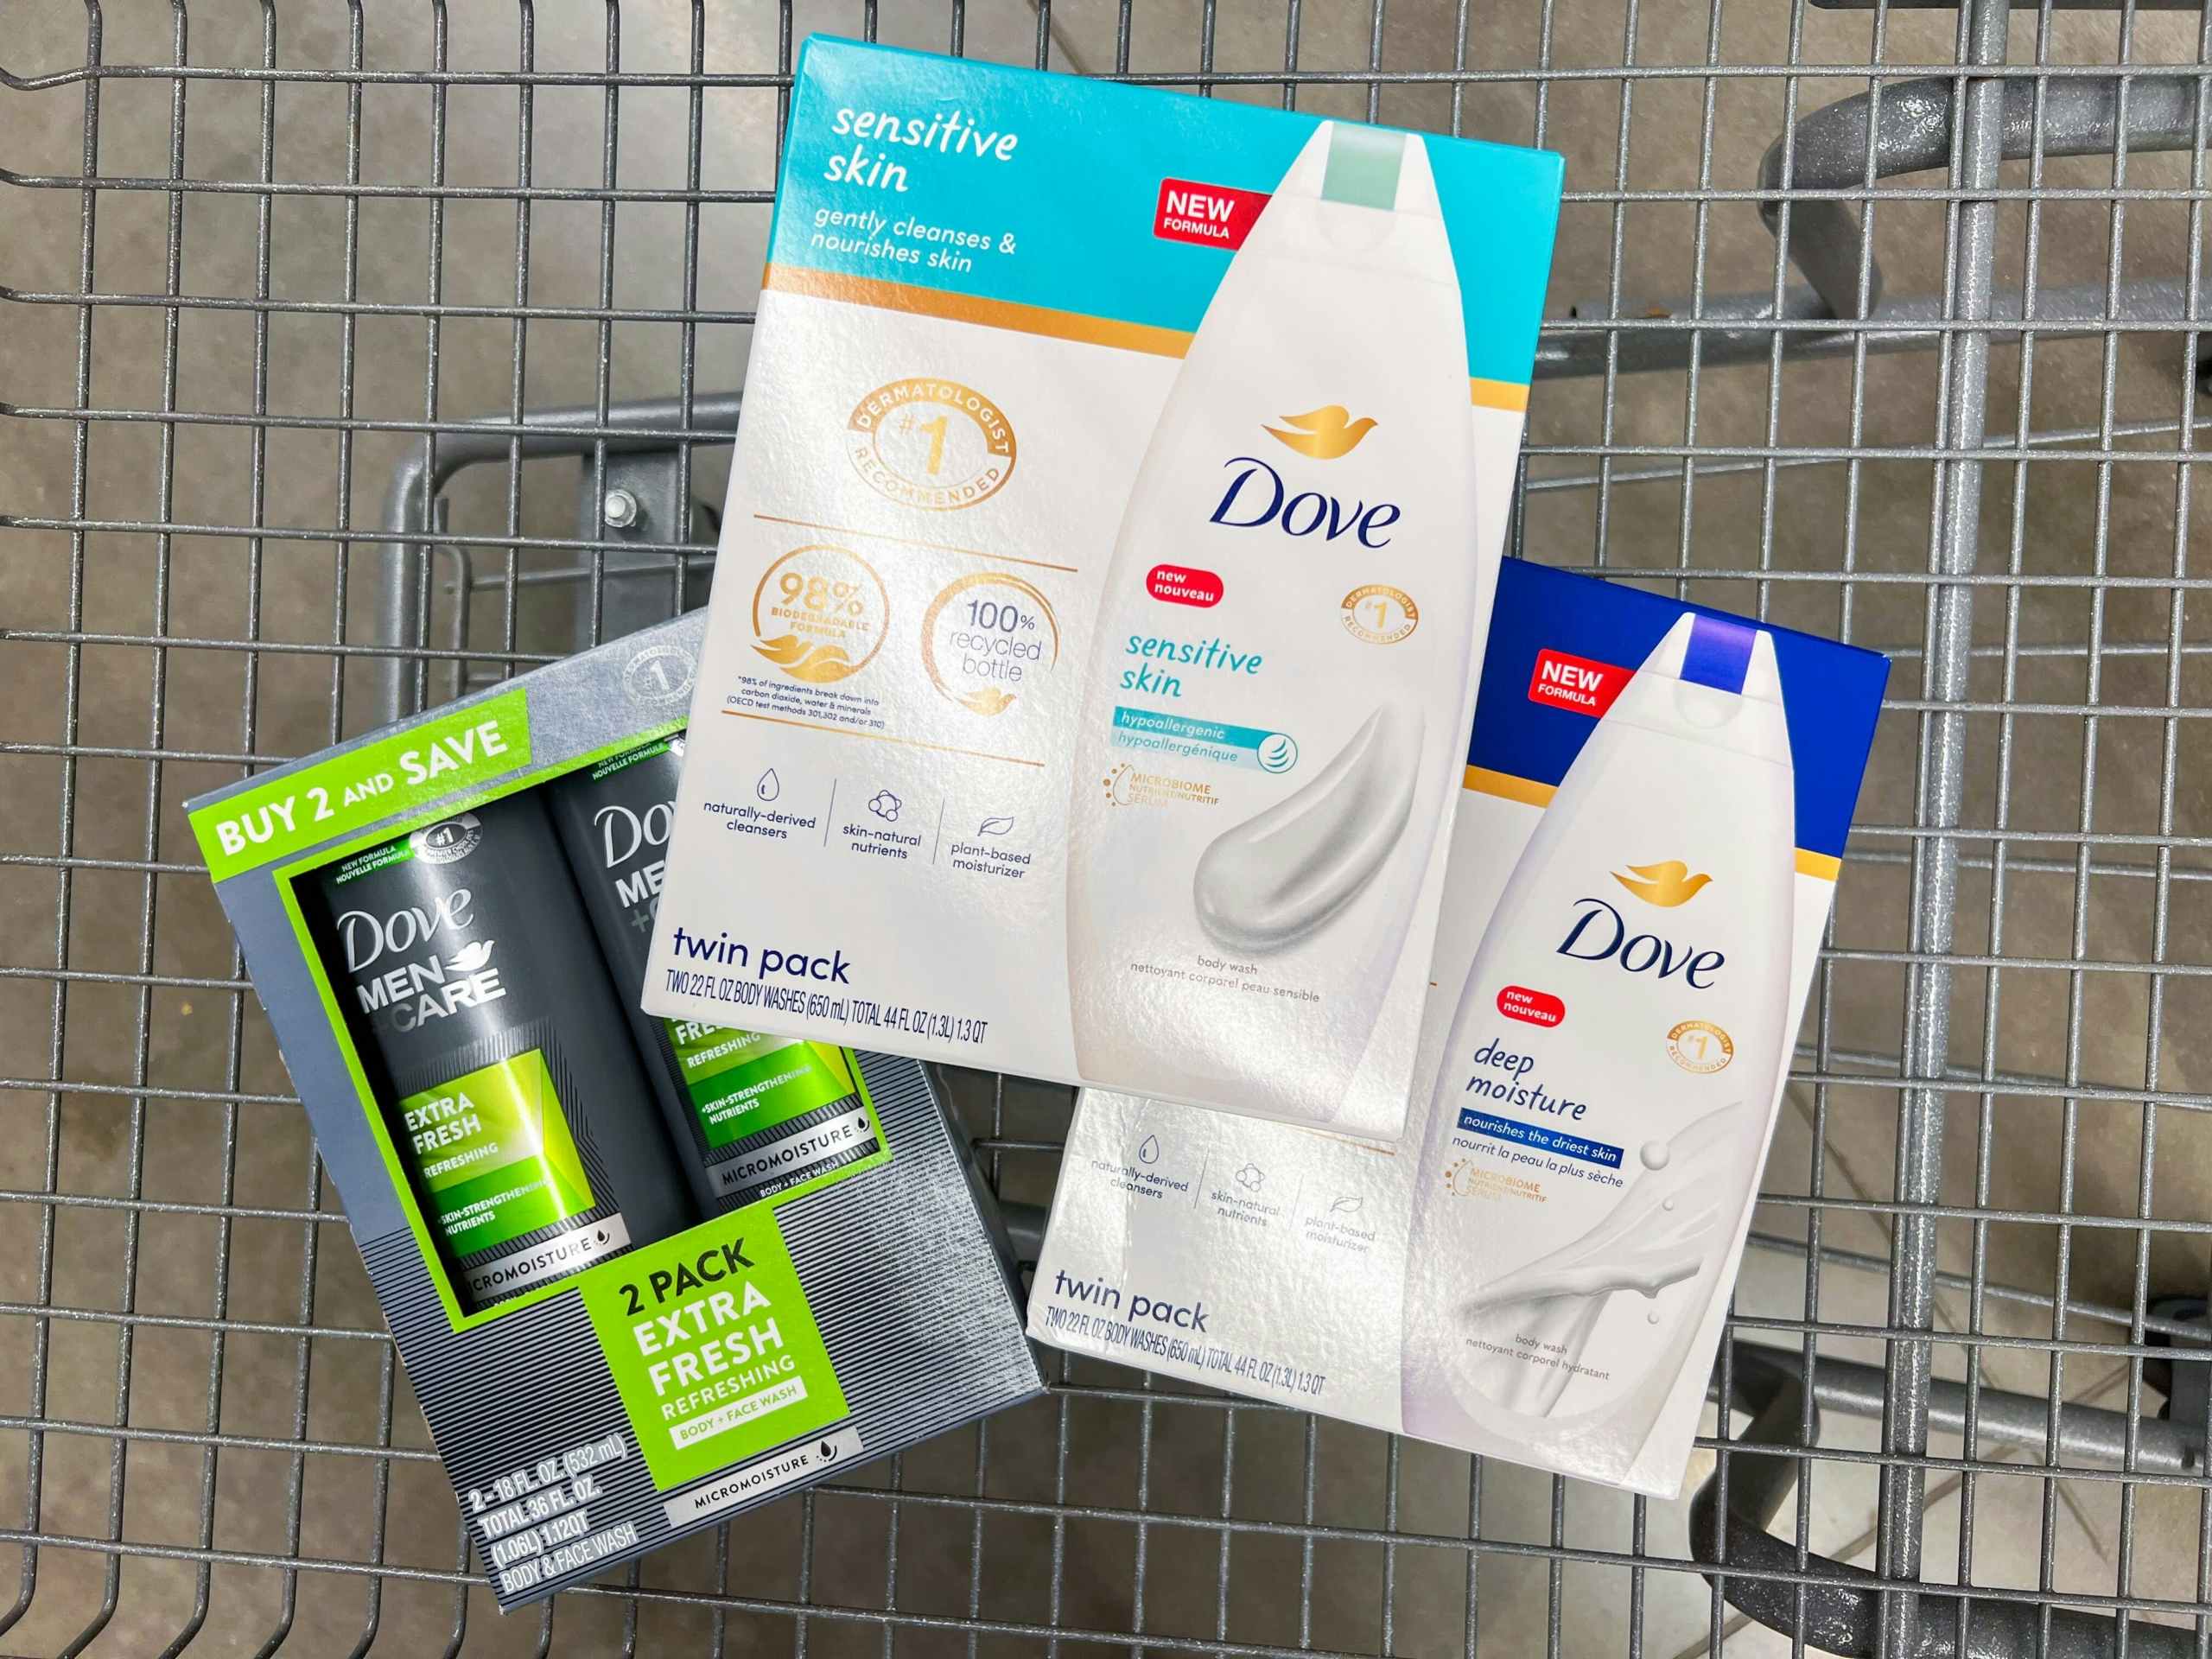 boxes of two-pack Dove body wash in Walmart shopping cart